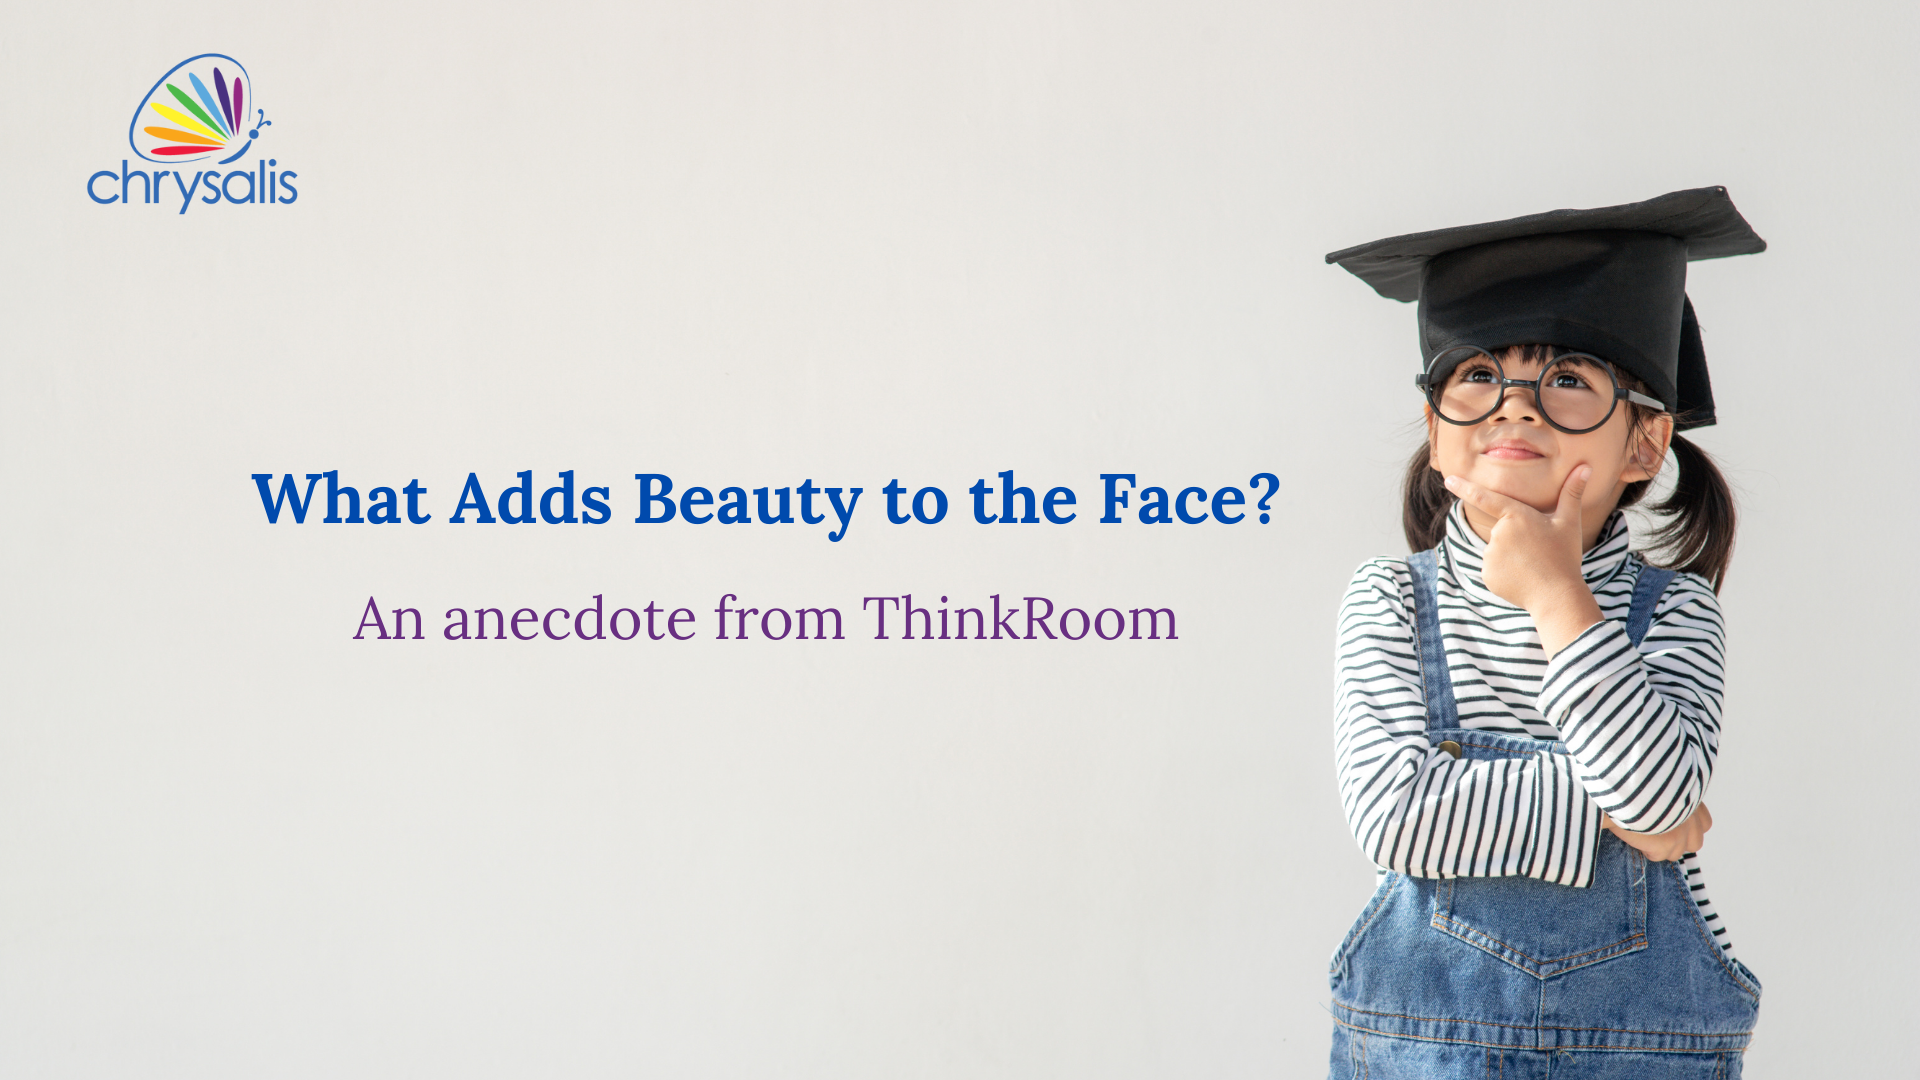 What Adds Beauty to the Face?